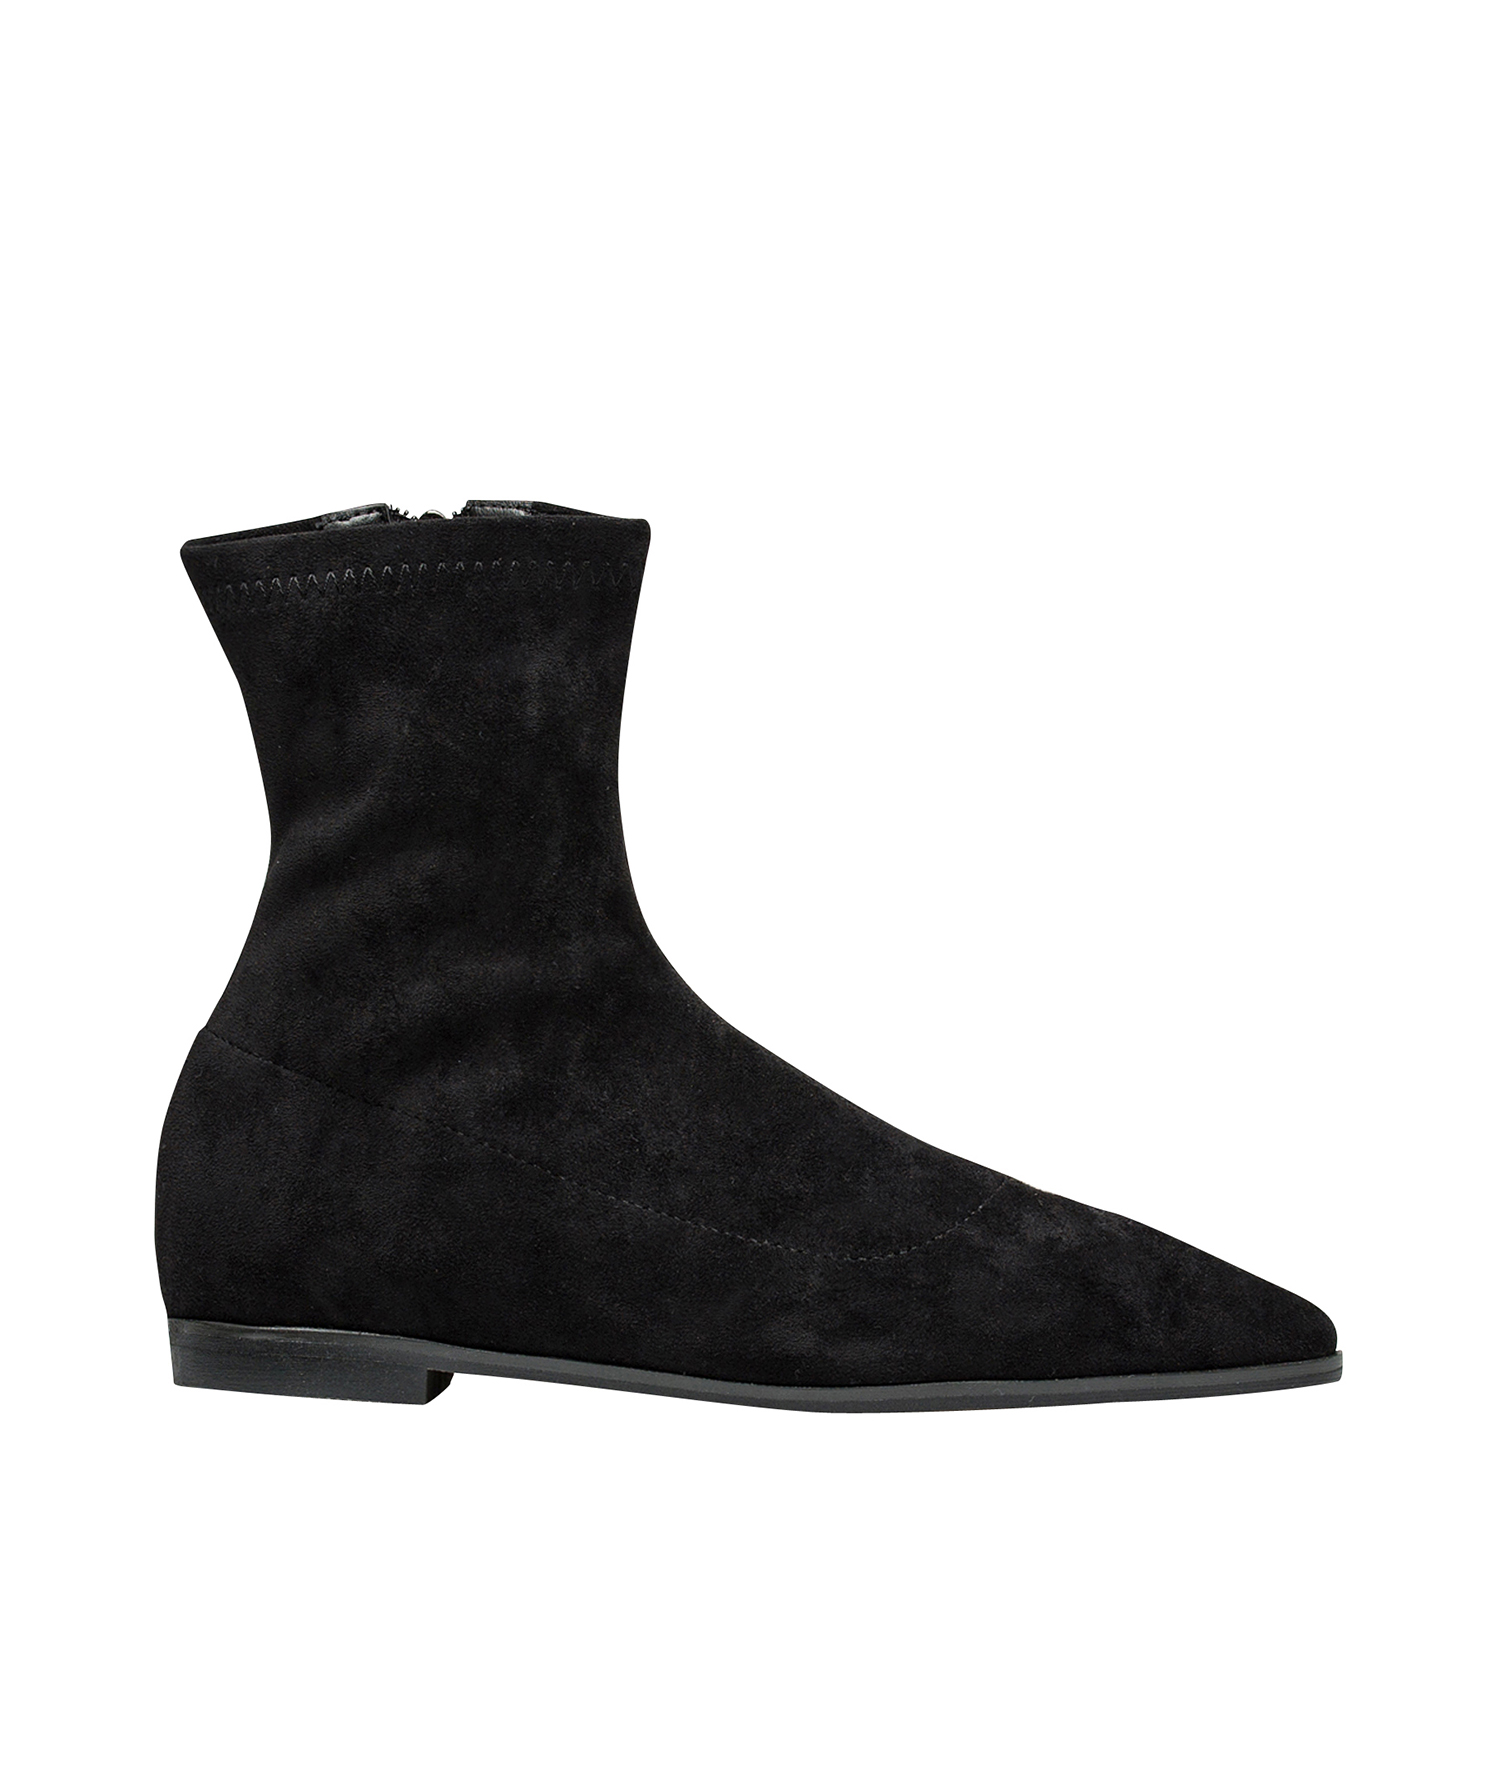 women's flat pointed chelsea boots